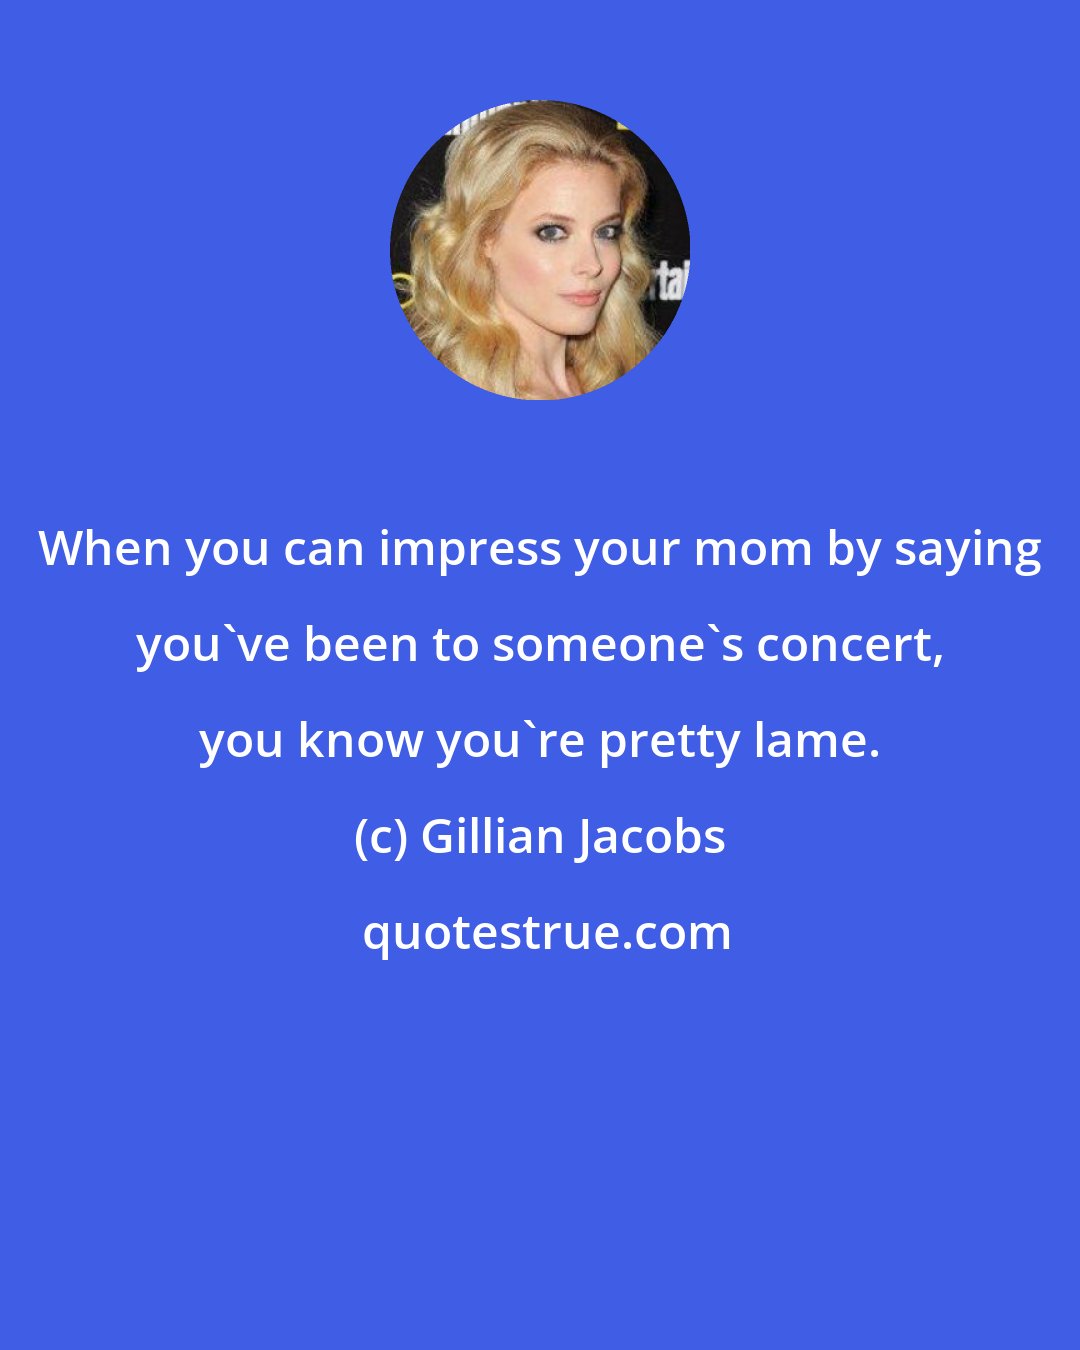 Gillian Jacobs: When you can impress your mom by saying you've been to someone's concert, you know you're pretty lame.